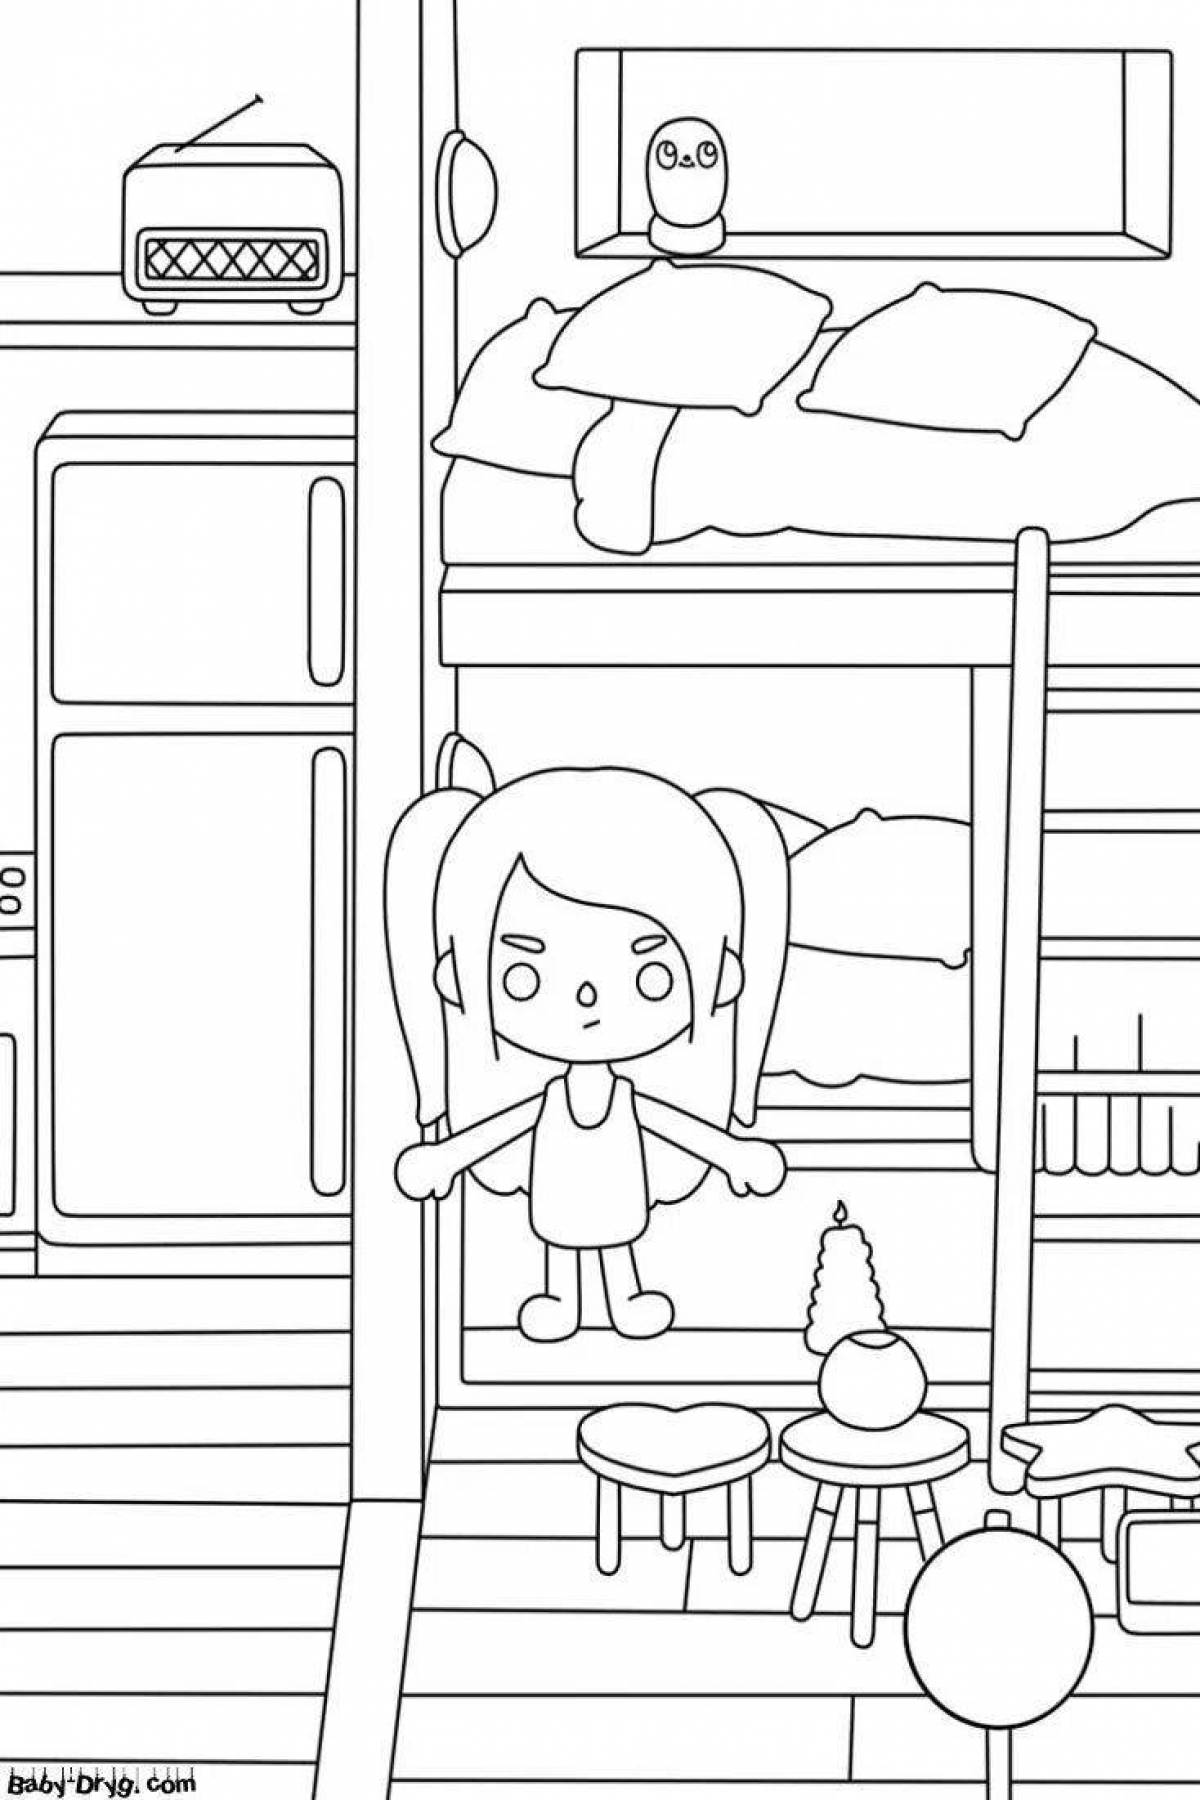 Radiant coloring page current sides black and white